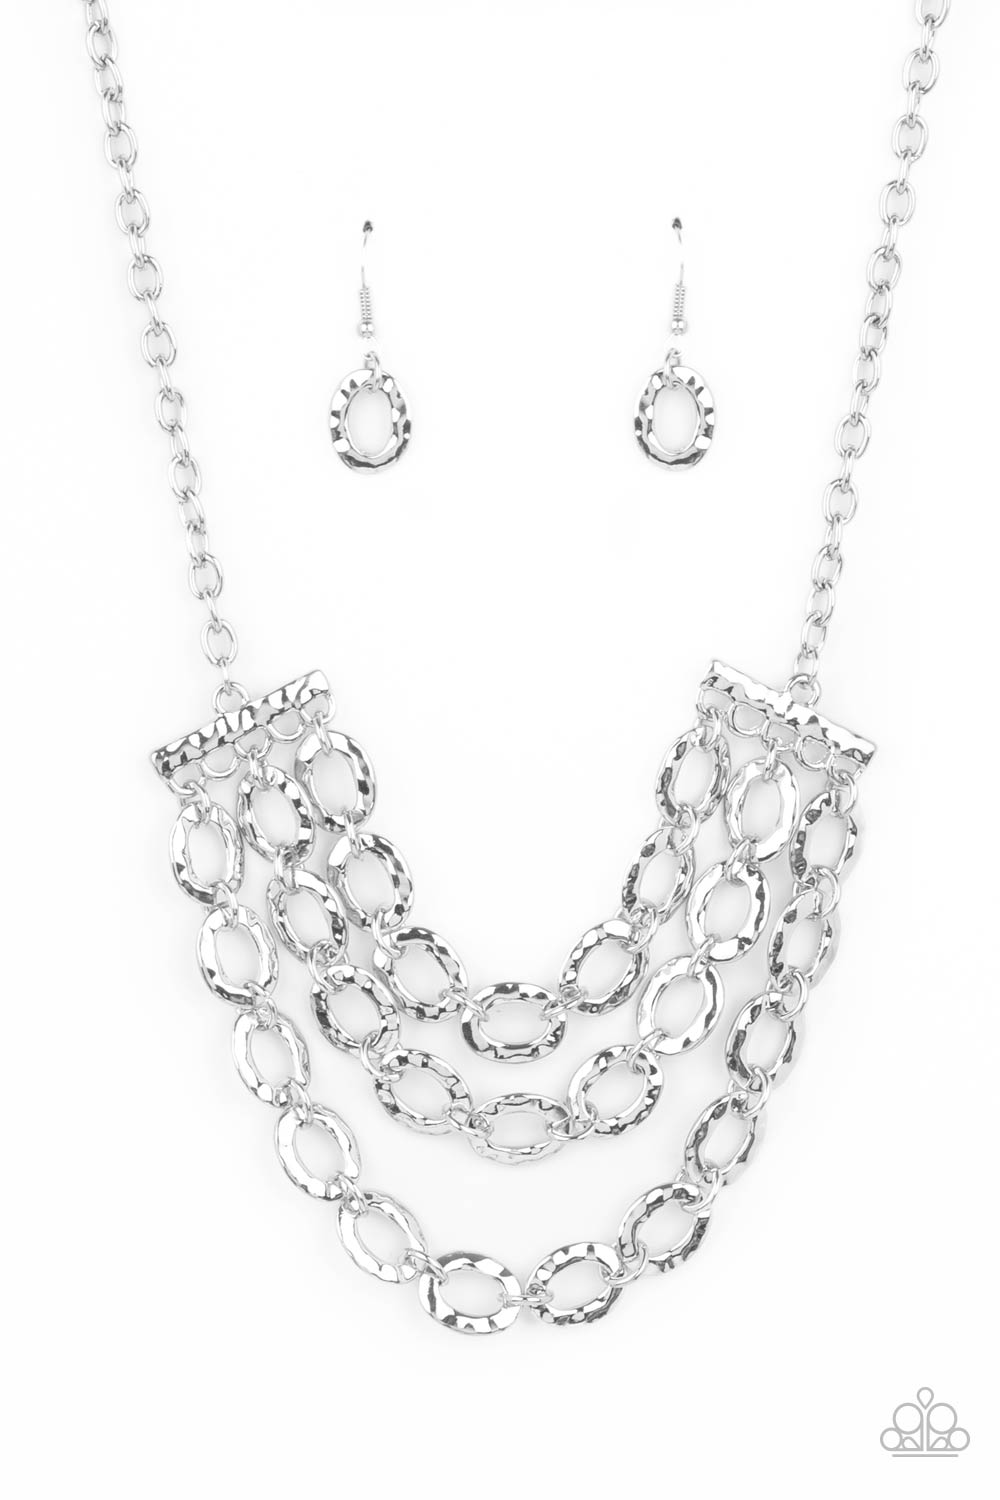 five-dollar-jewelry-repeat-after-me-silver-necklace-paparazzi-accessories